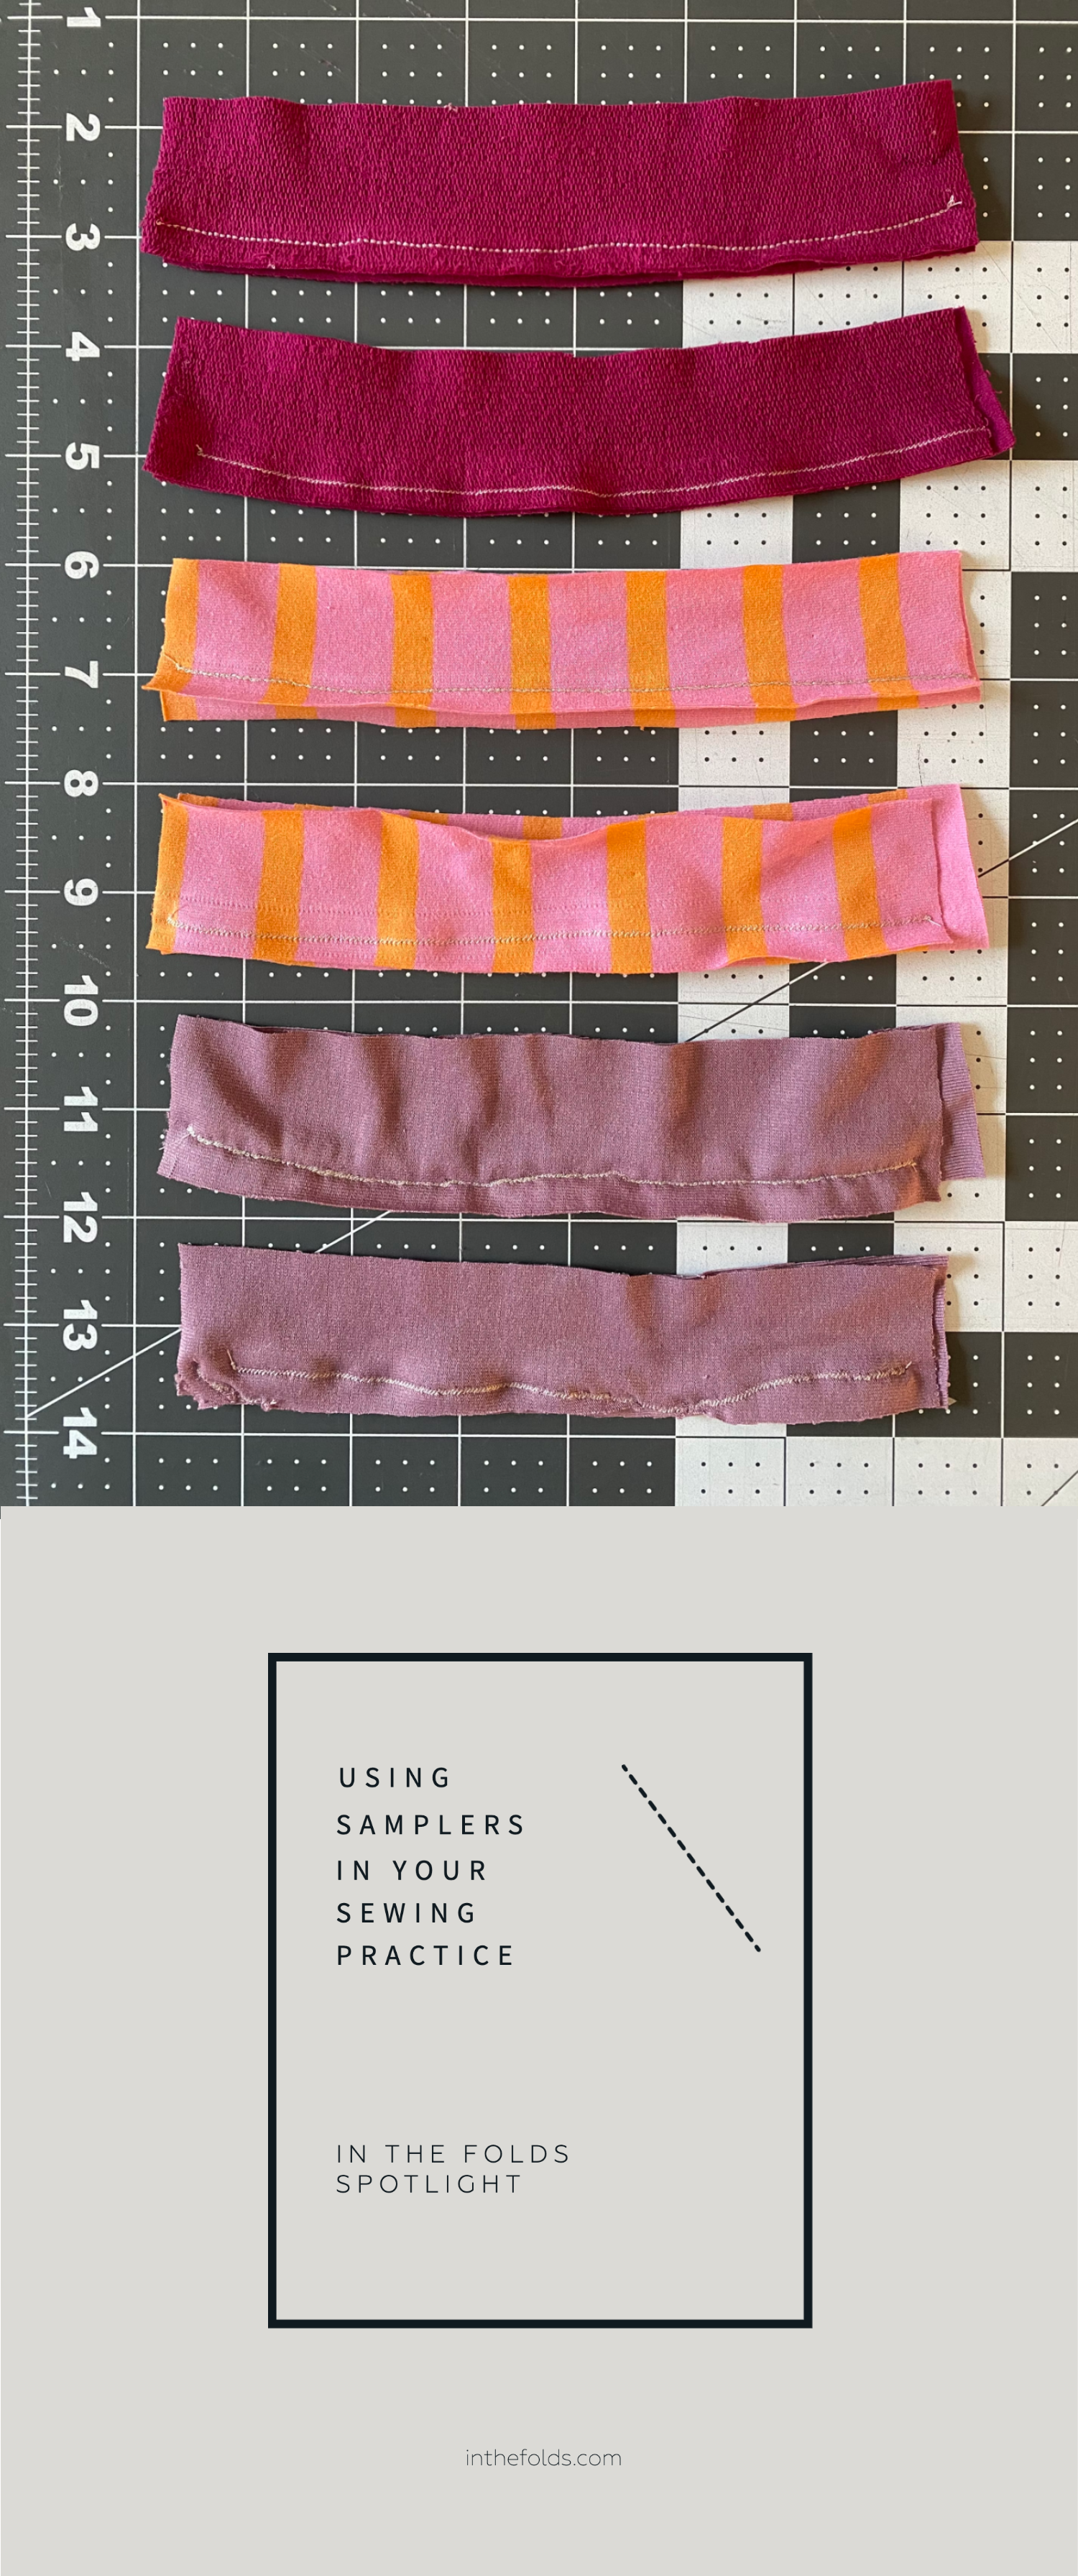 Tilly and the Buttons: How to Make Your Own Bias Binding